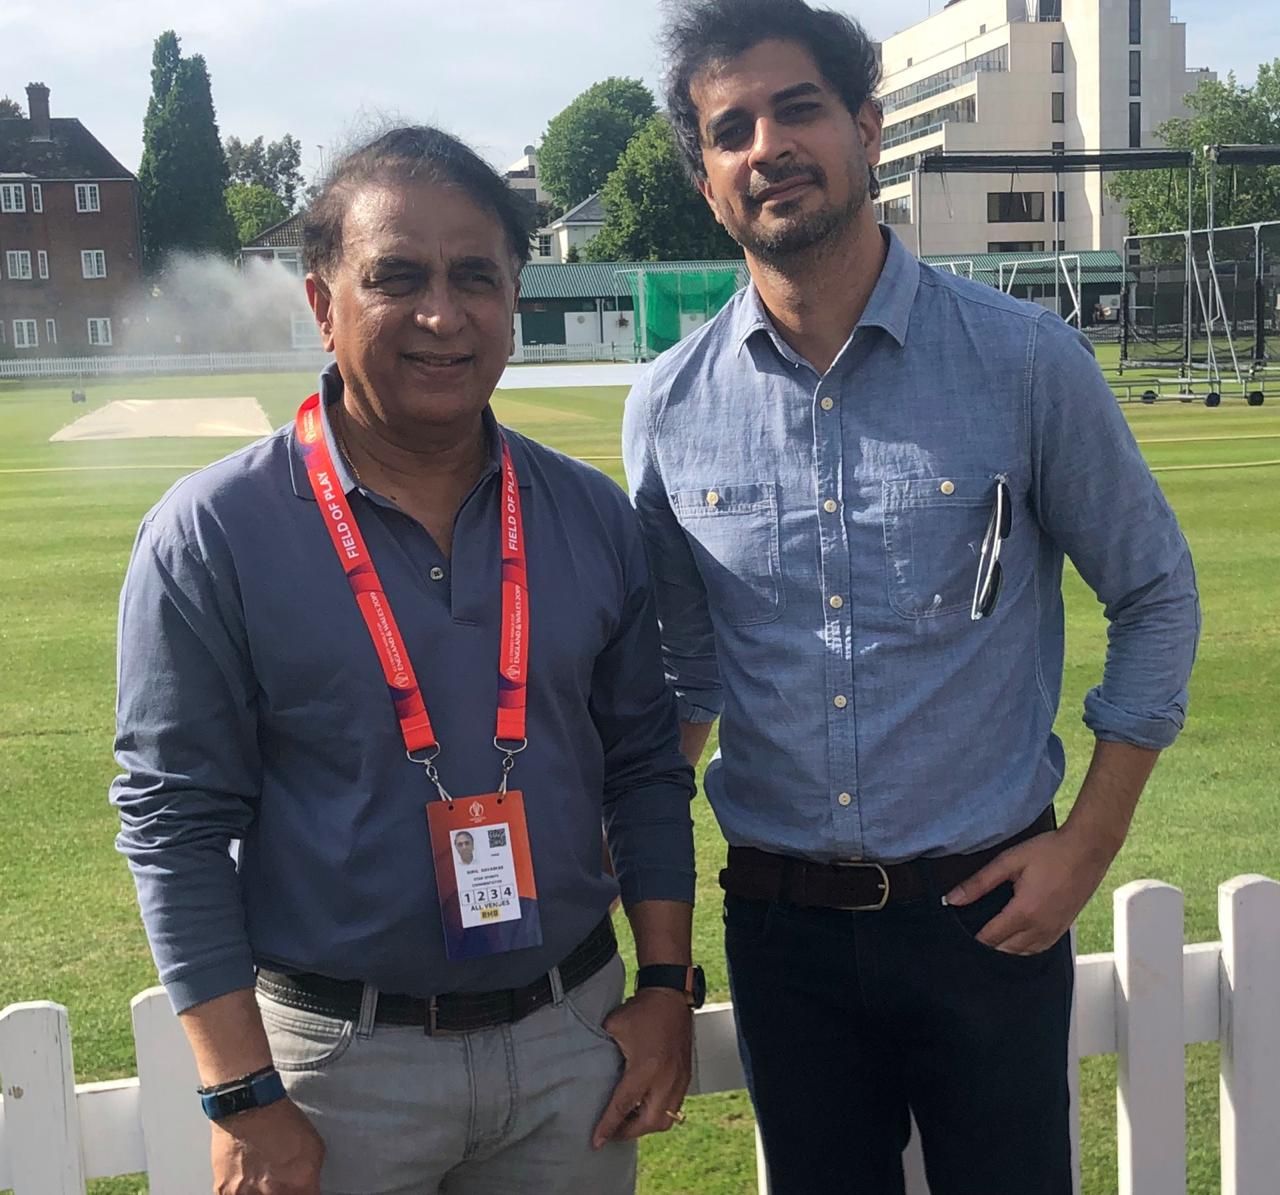 ‘I Have Always Felt, I Actually Lived Those Festivities When India Won 83 World Cup’ : Tahir Raj Bhasin On How The World Cup Win Impacted His Childhood